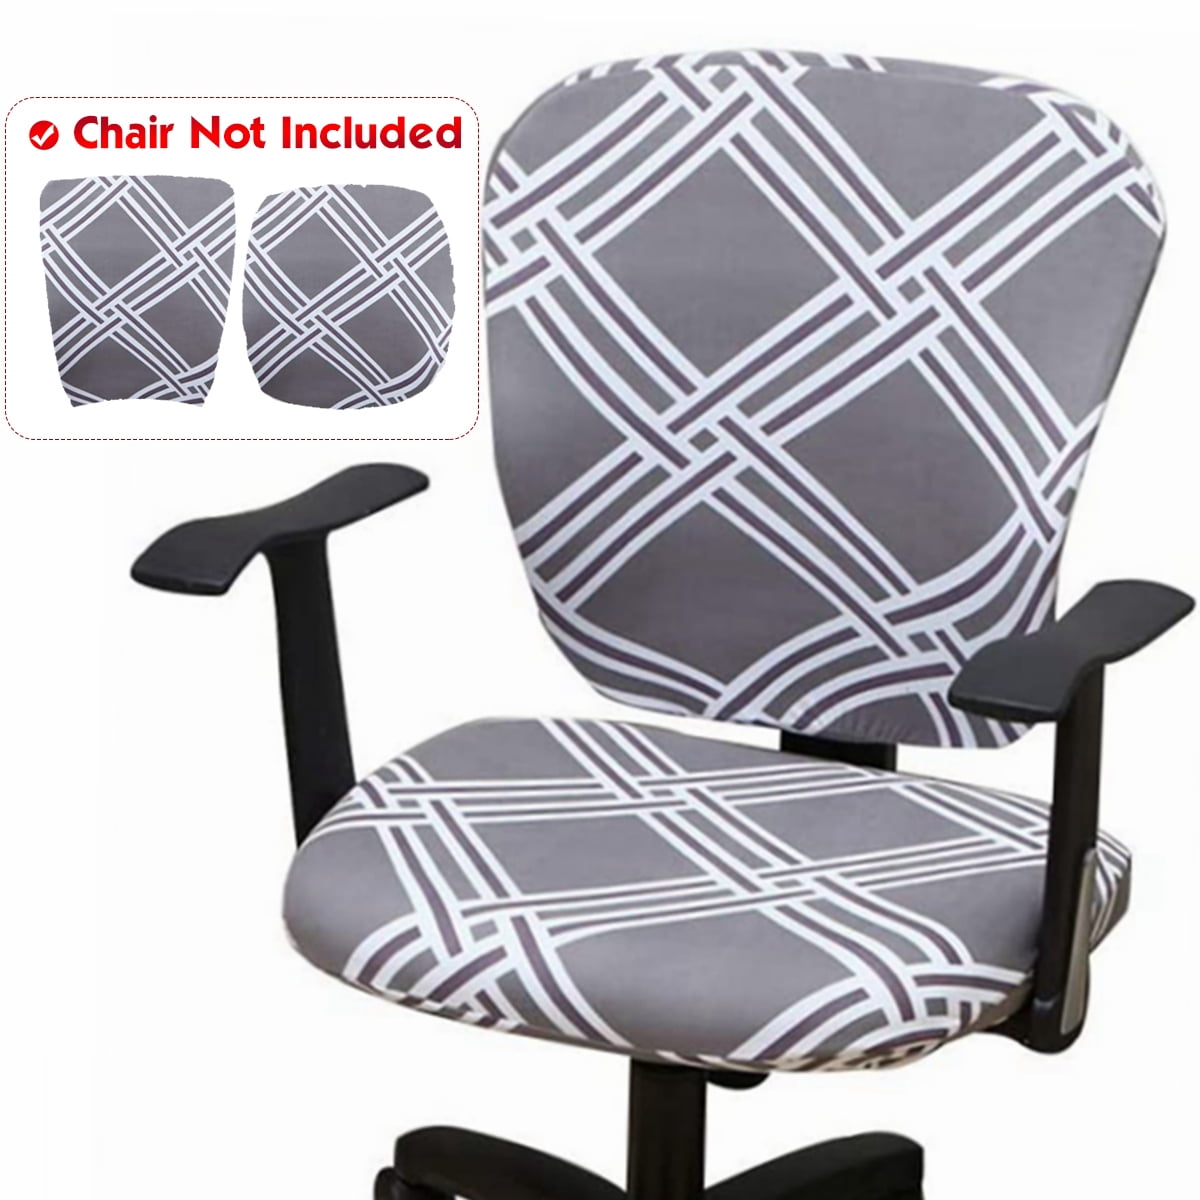 Universal Spandex Stretch Office Computer Chair Slipcover Seat Protecting Cover